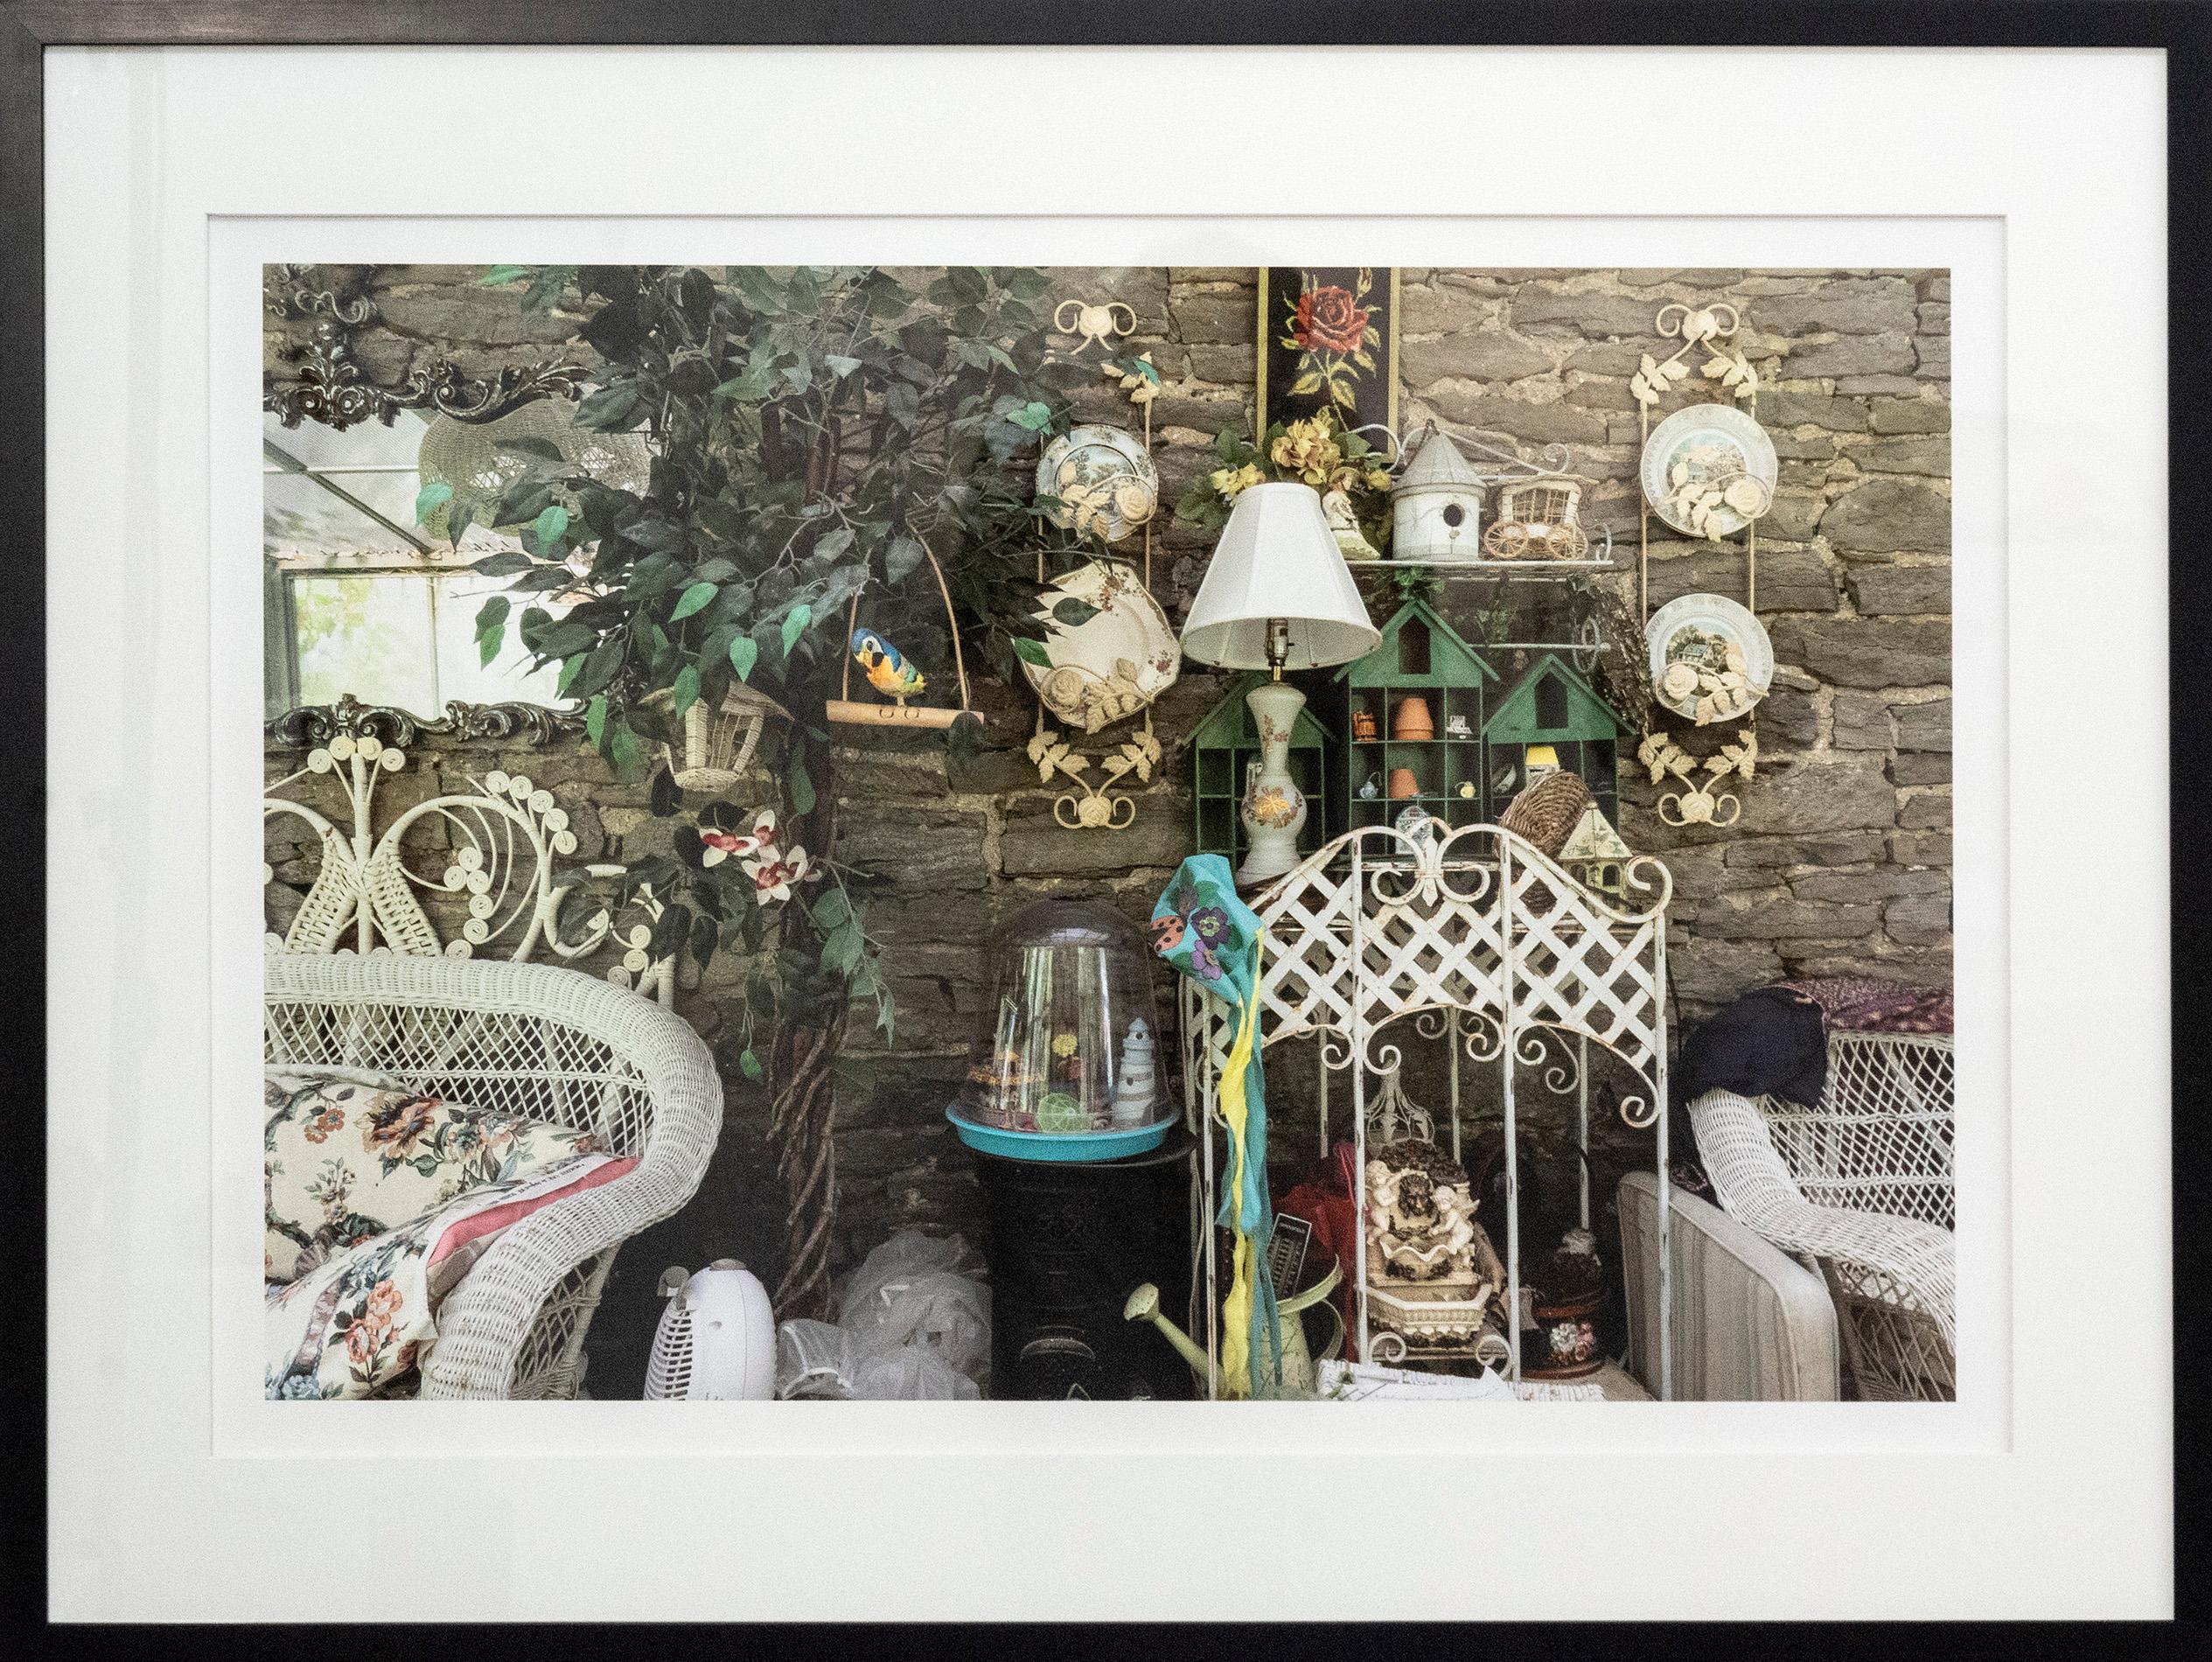 Sharon's Sunroom 1/5 - A photograph of carefully curated collected items - Photograph by Shani Mootoo